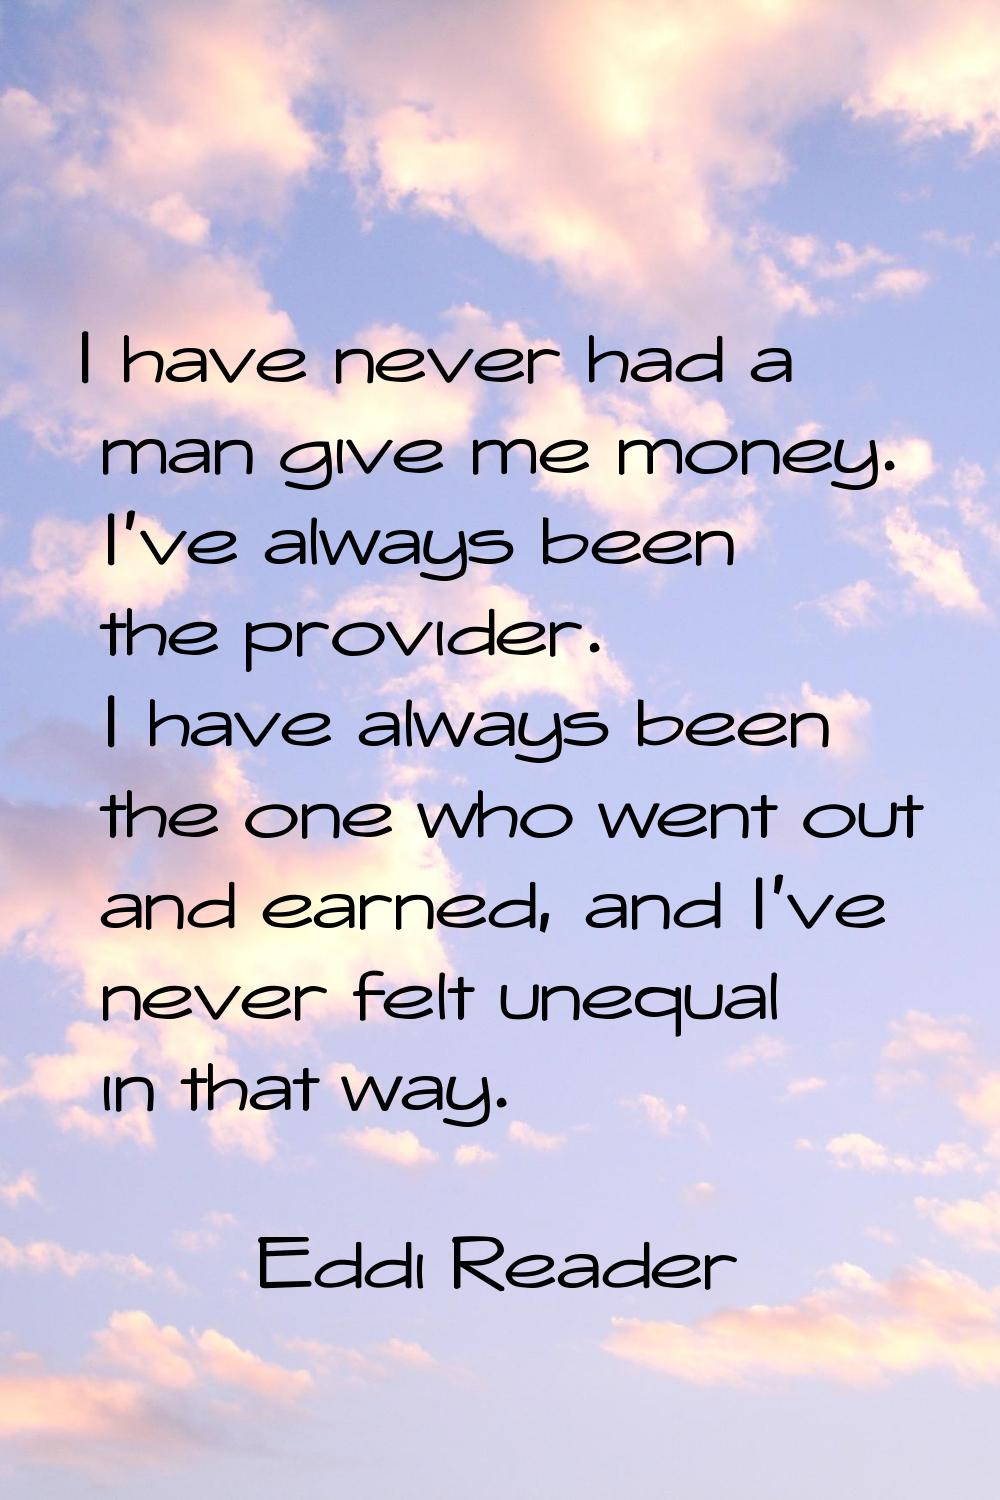 I have never had a man give me money. I've always been the provider. I have always been the one who